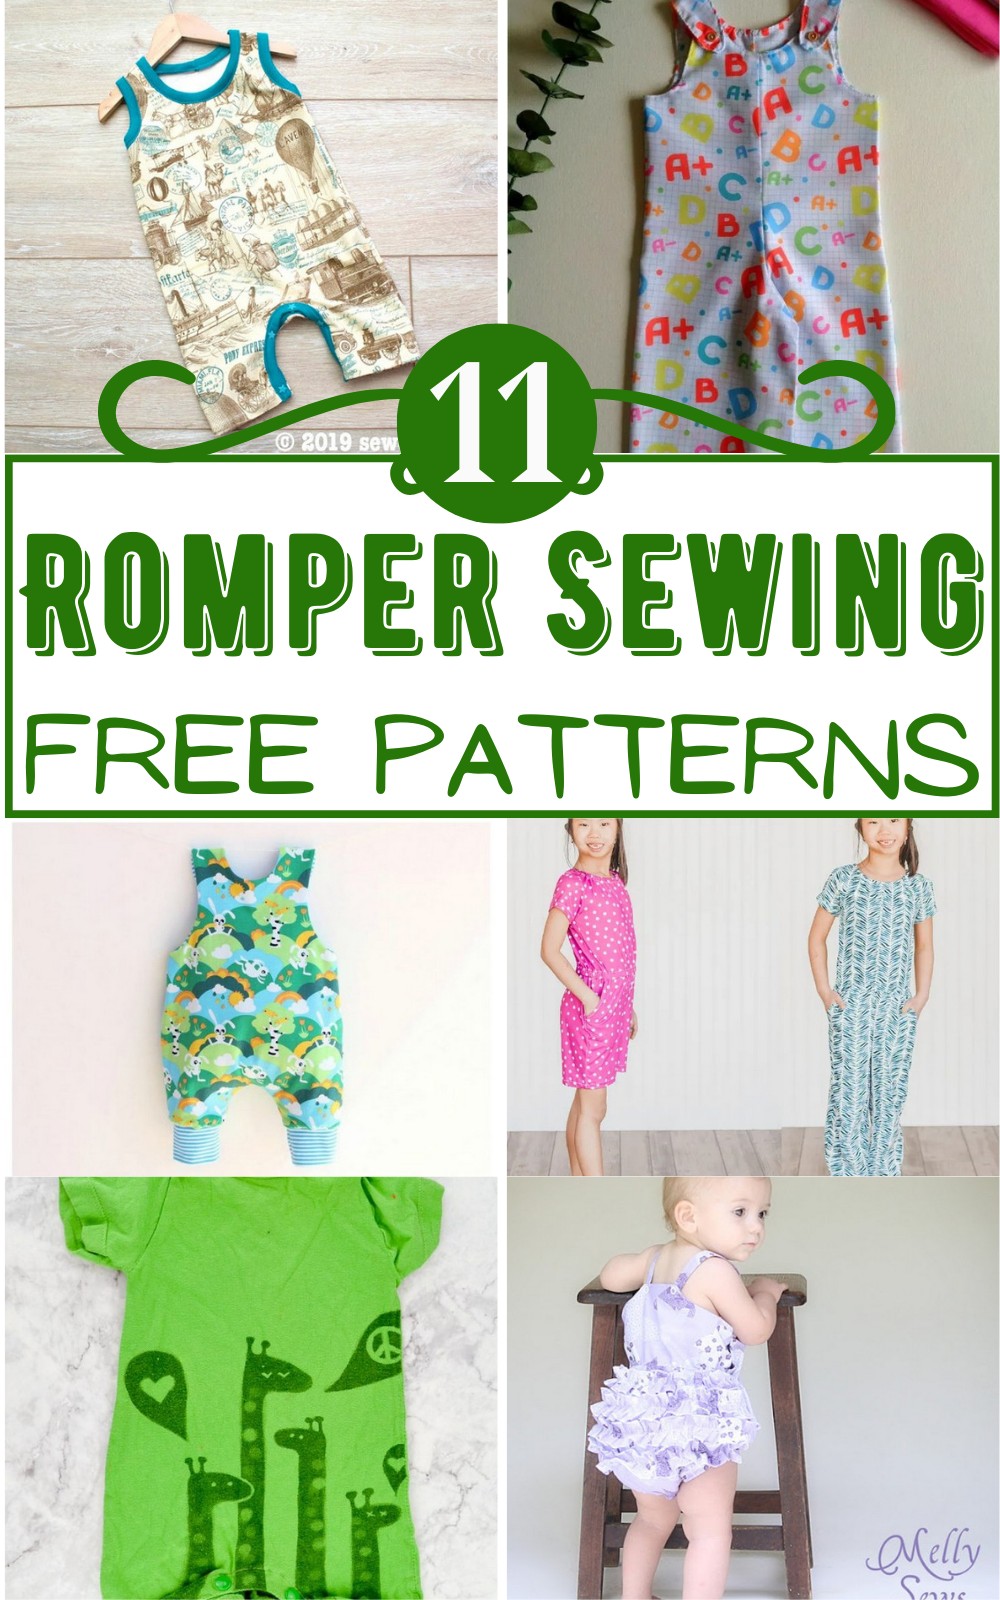 11 Free Romper Sewing Patterns For Kids - Craftsy